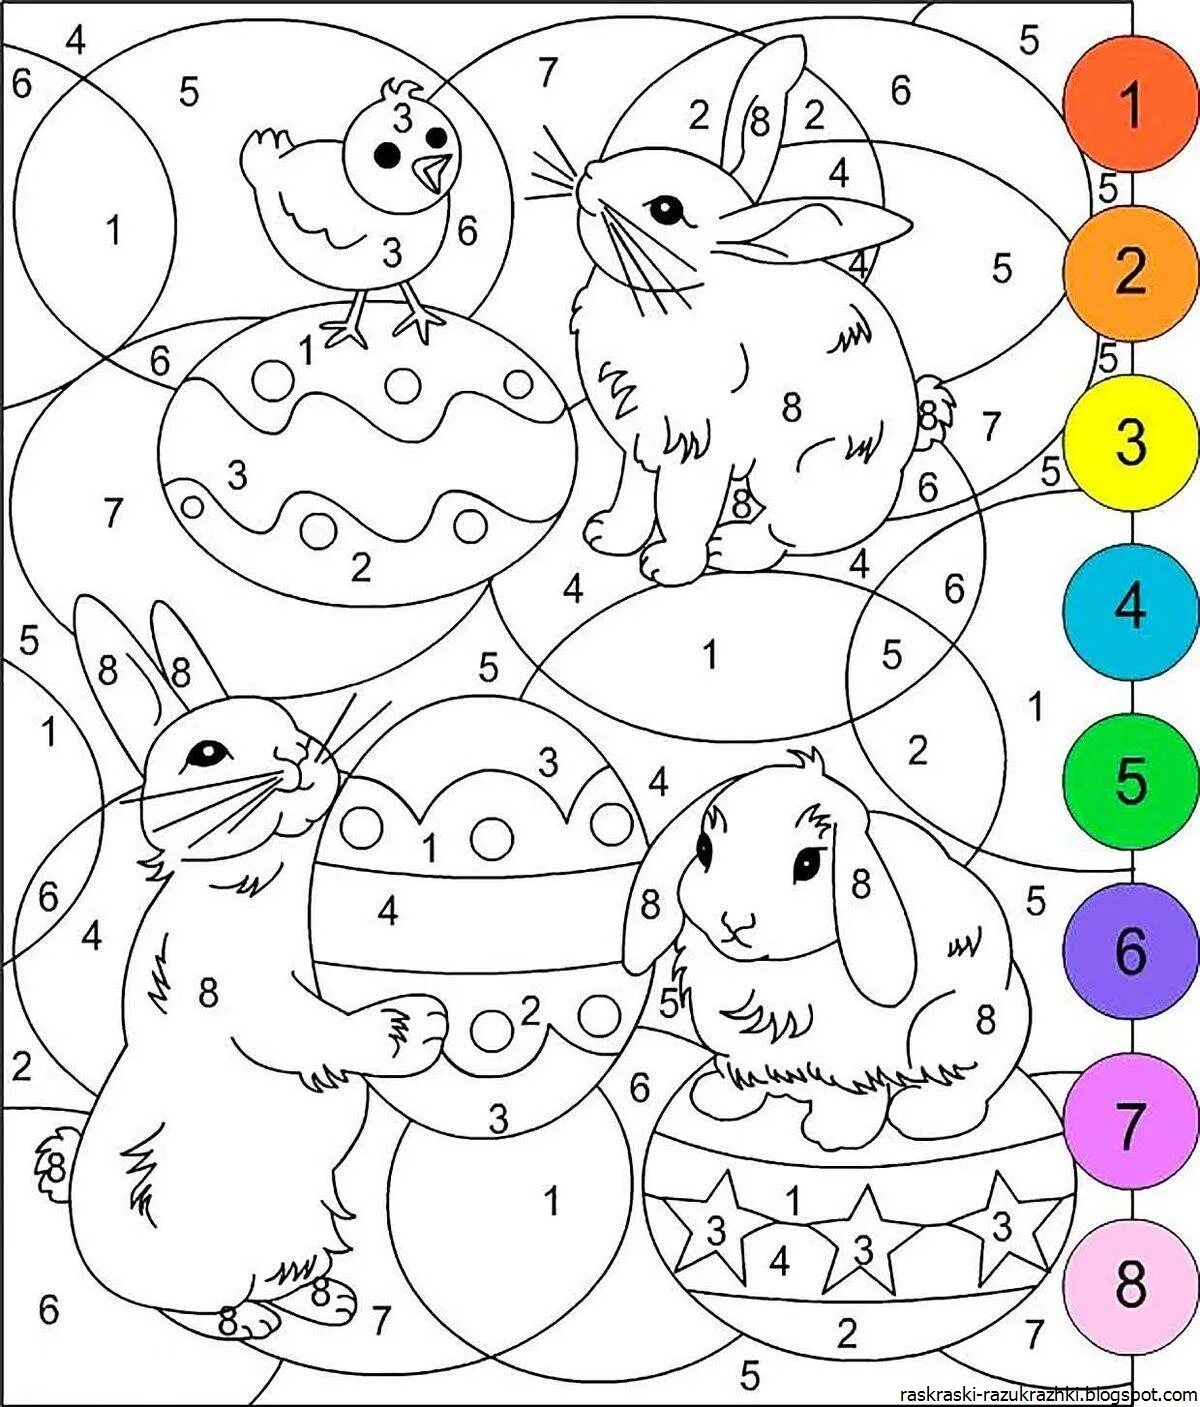 Color-joyous coloring page digital for children 6-7 years old